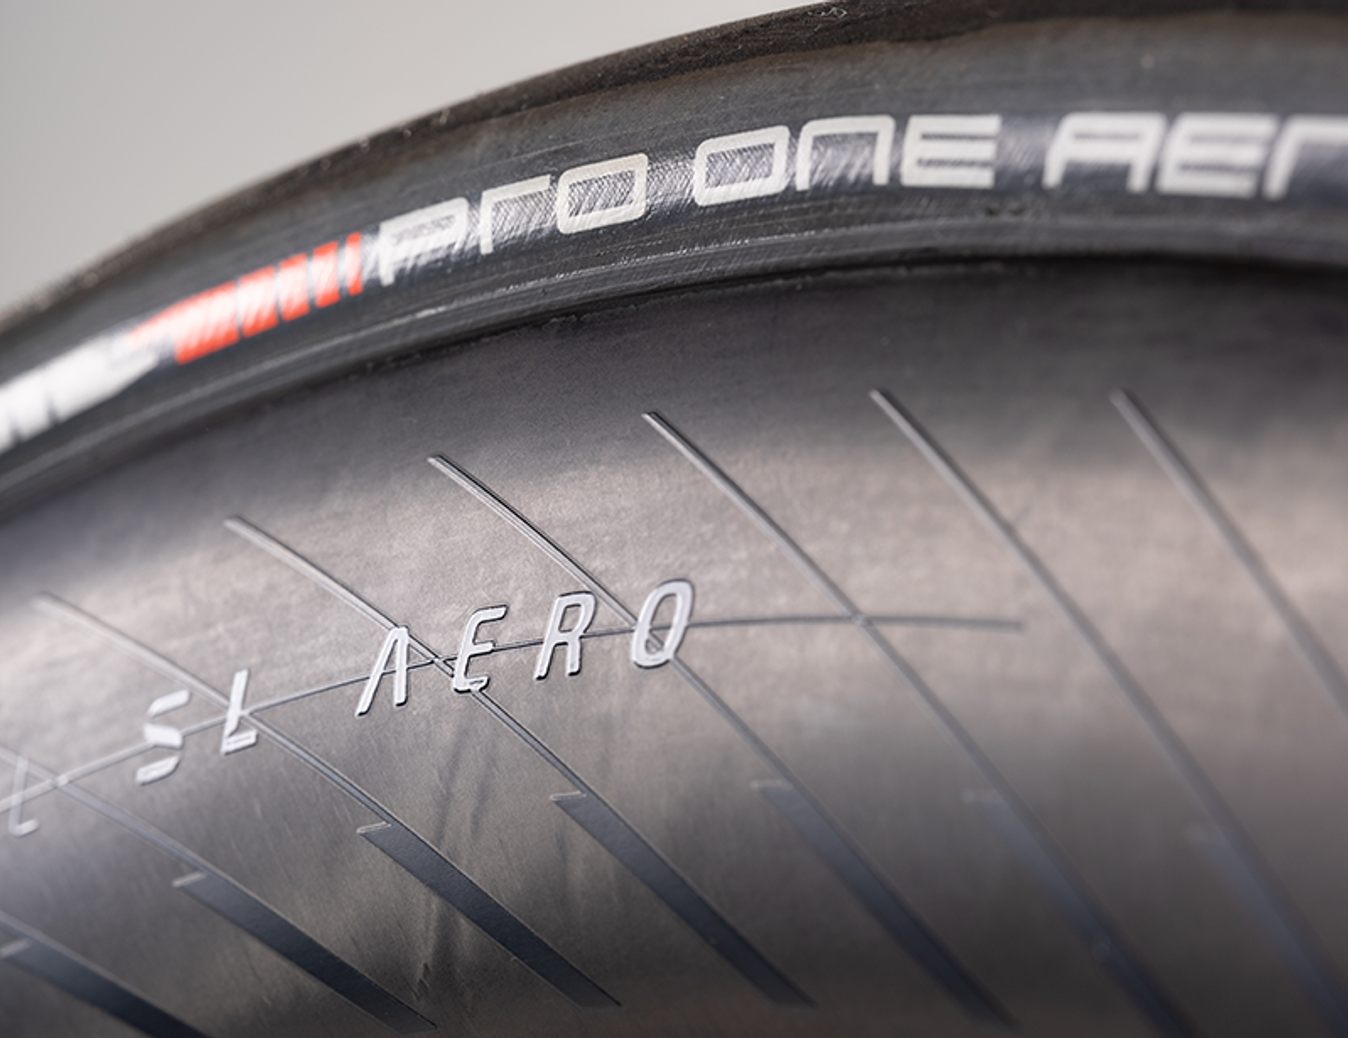 The Pro One Aero replaces the Pro One TT as Schwalbe's most aerodynamic tyre.